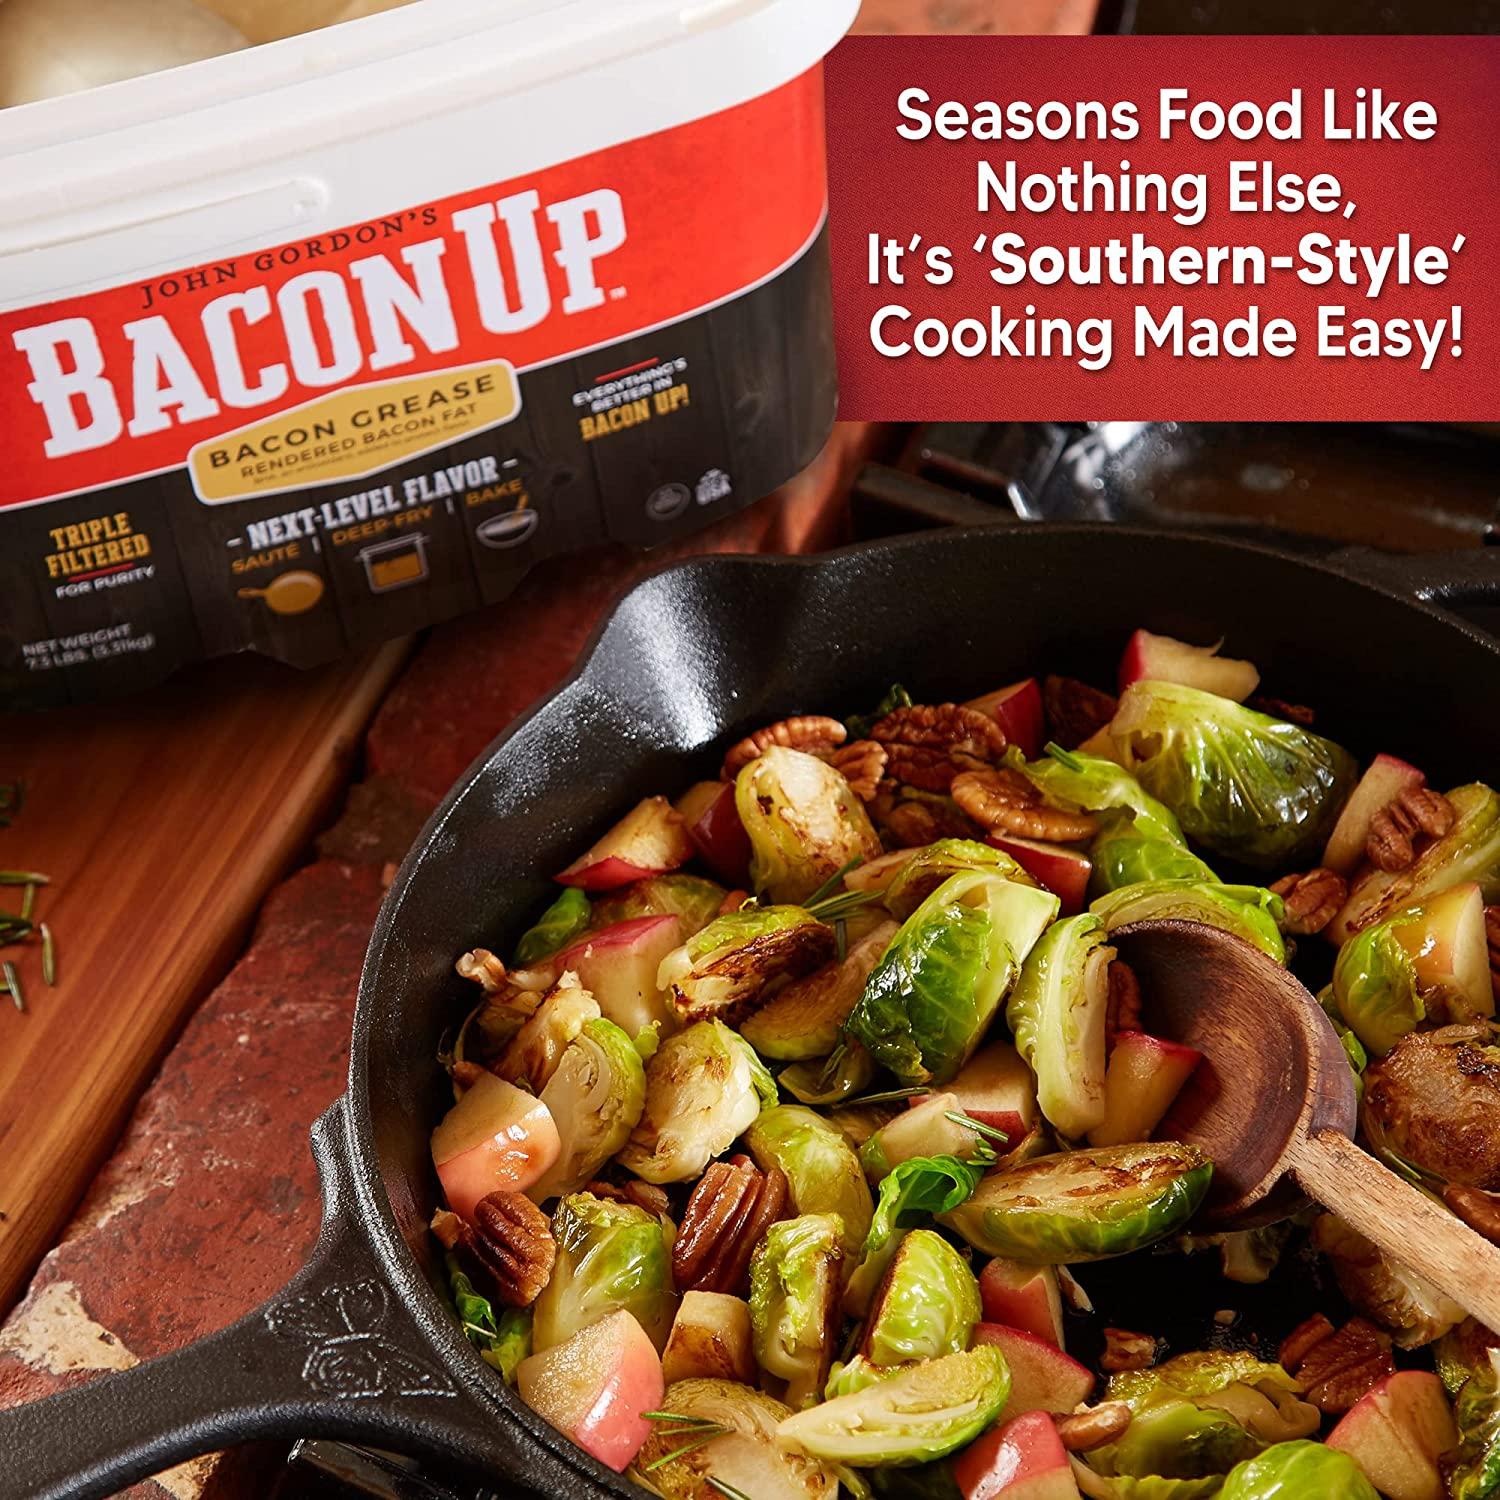 Bacon UpⓇ Bacon Grease for Cooking - 14 Ounce Tub of Authentic Bacon Fat  for Cooking, Frying and Baking - Triple-Filtered for Purity, No Carbs